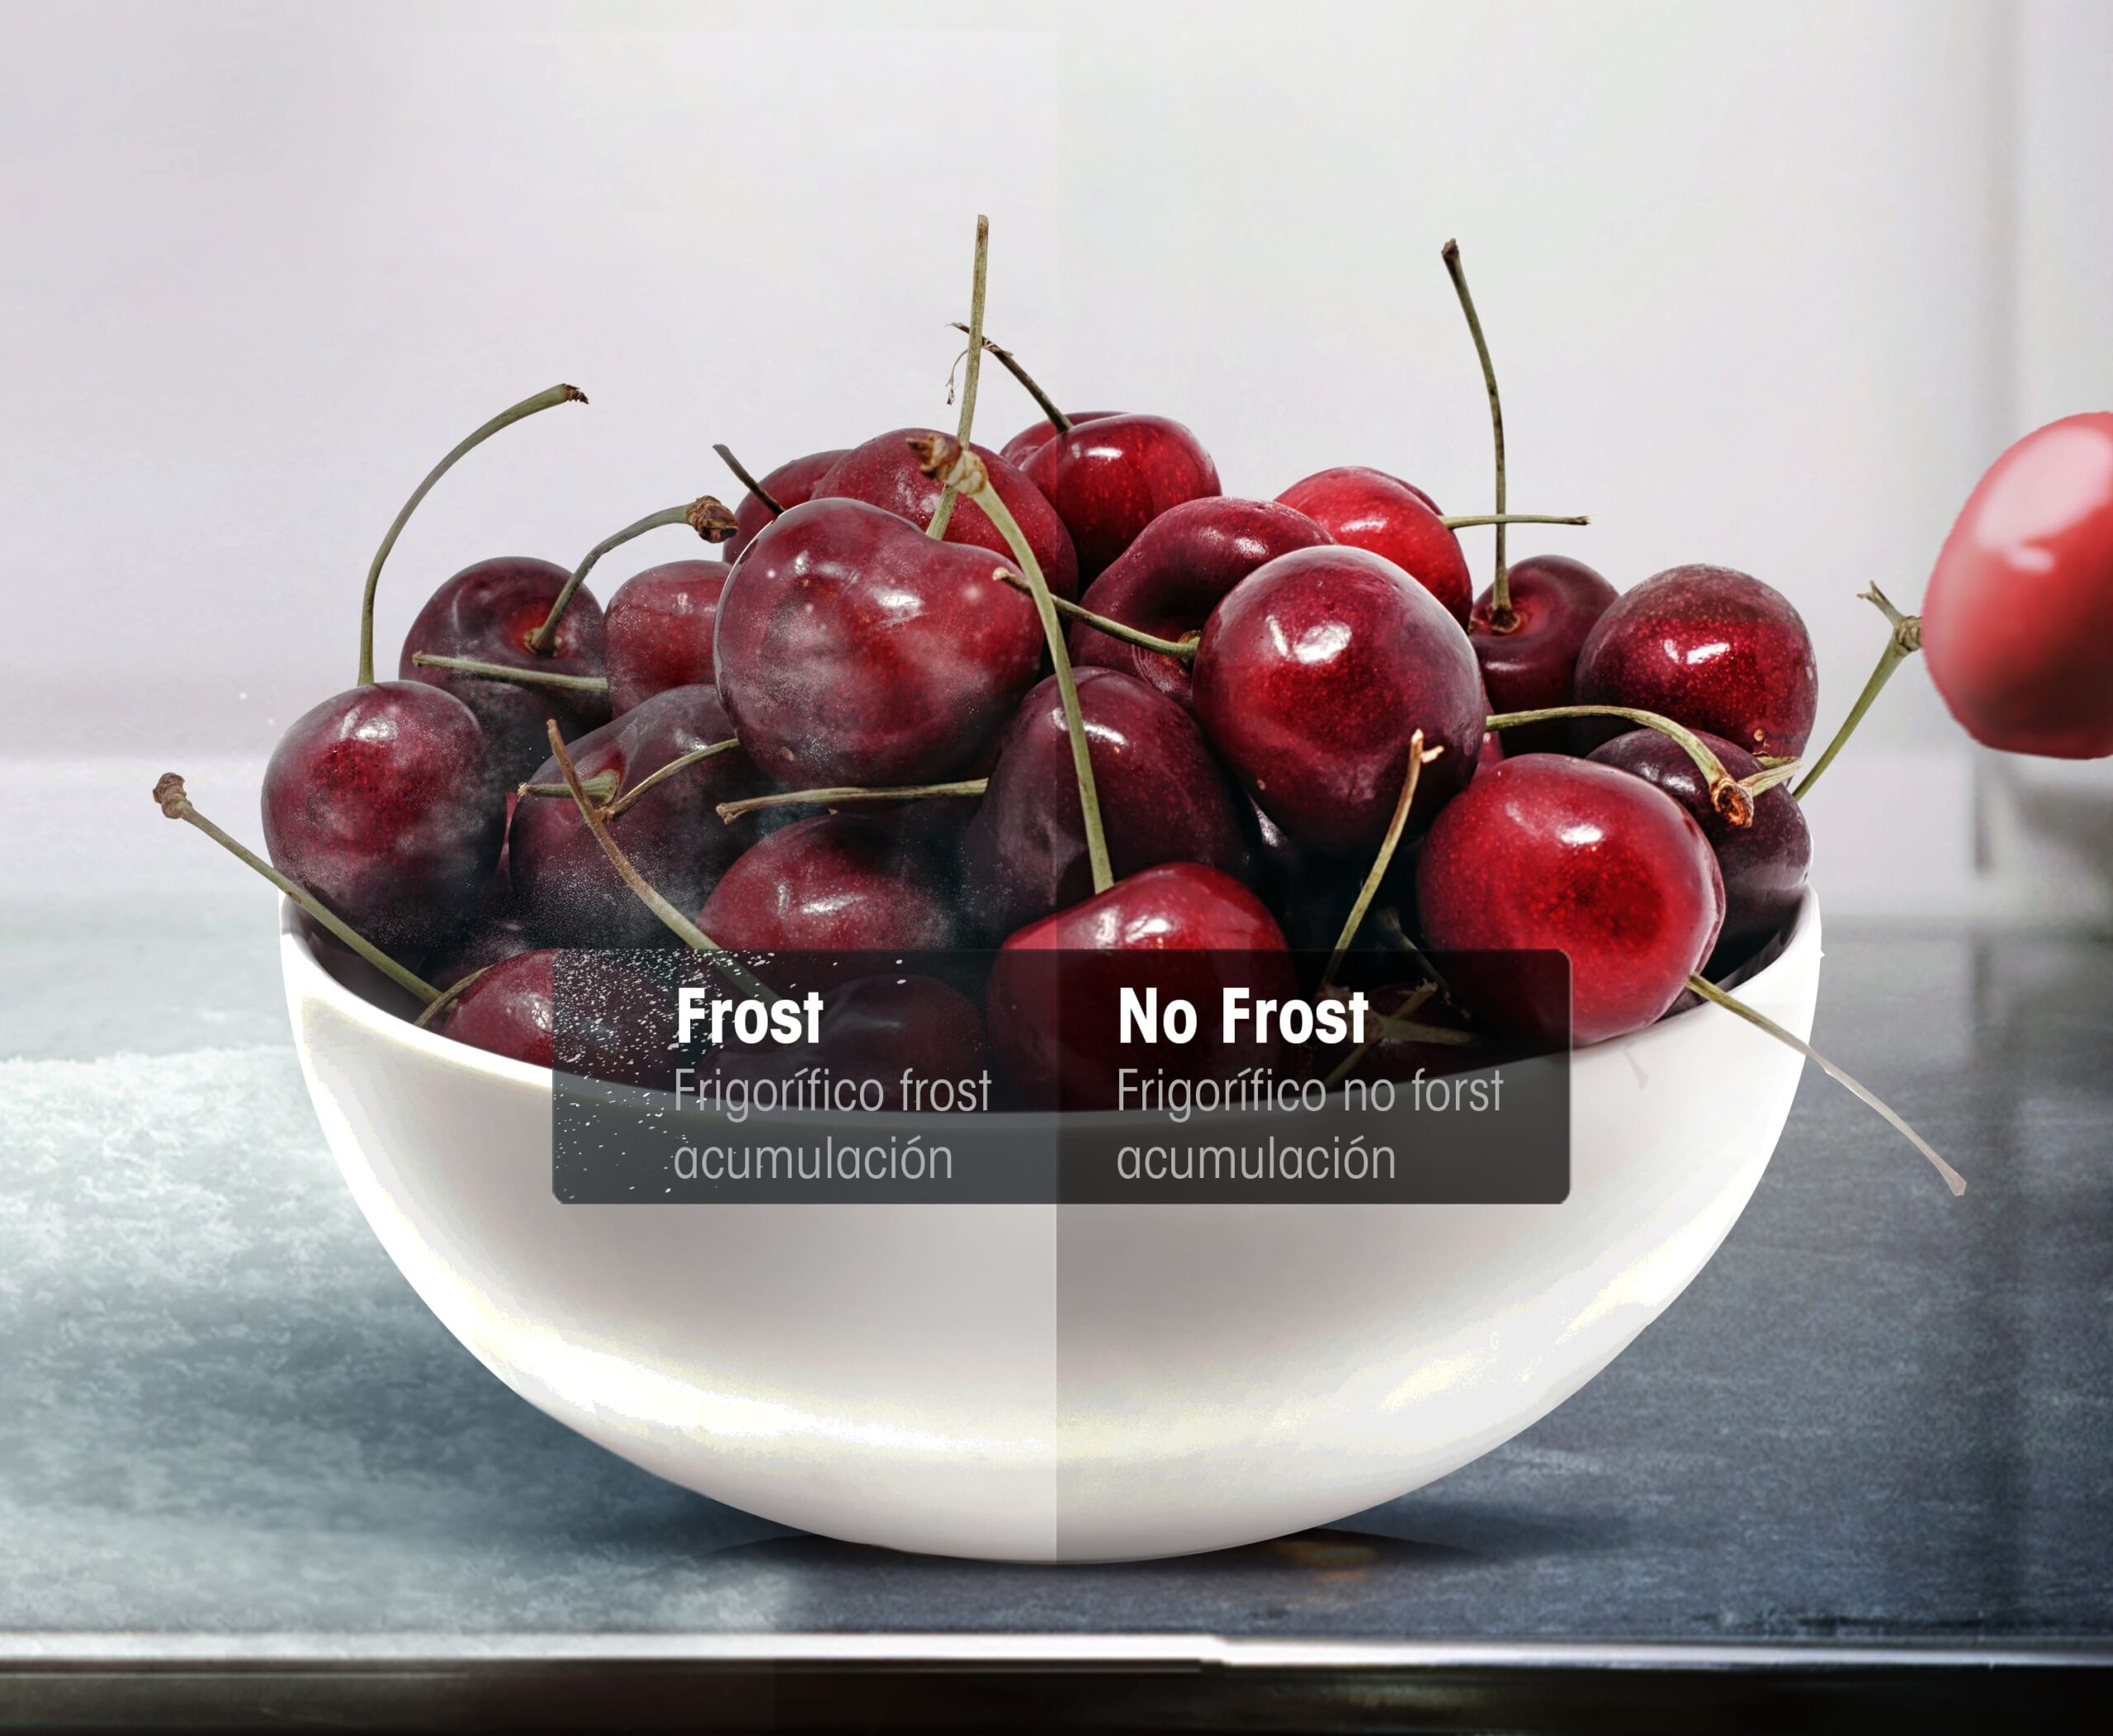 TOTAL NO FROST